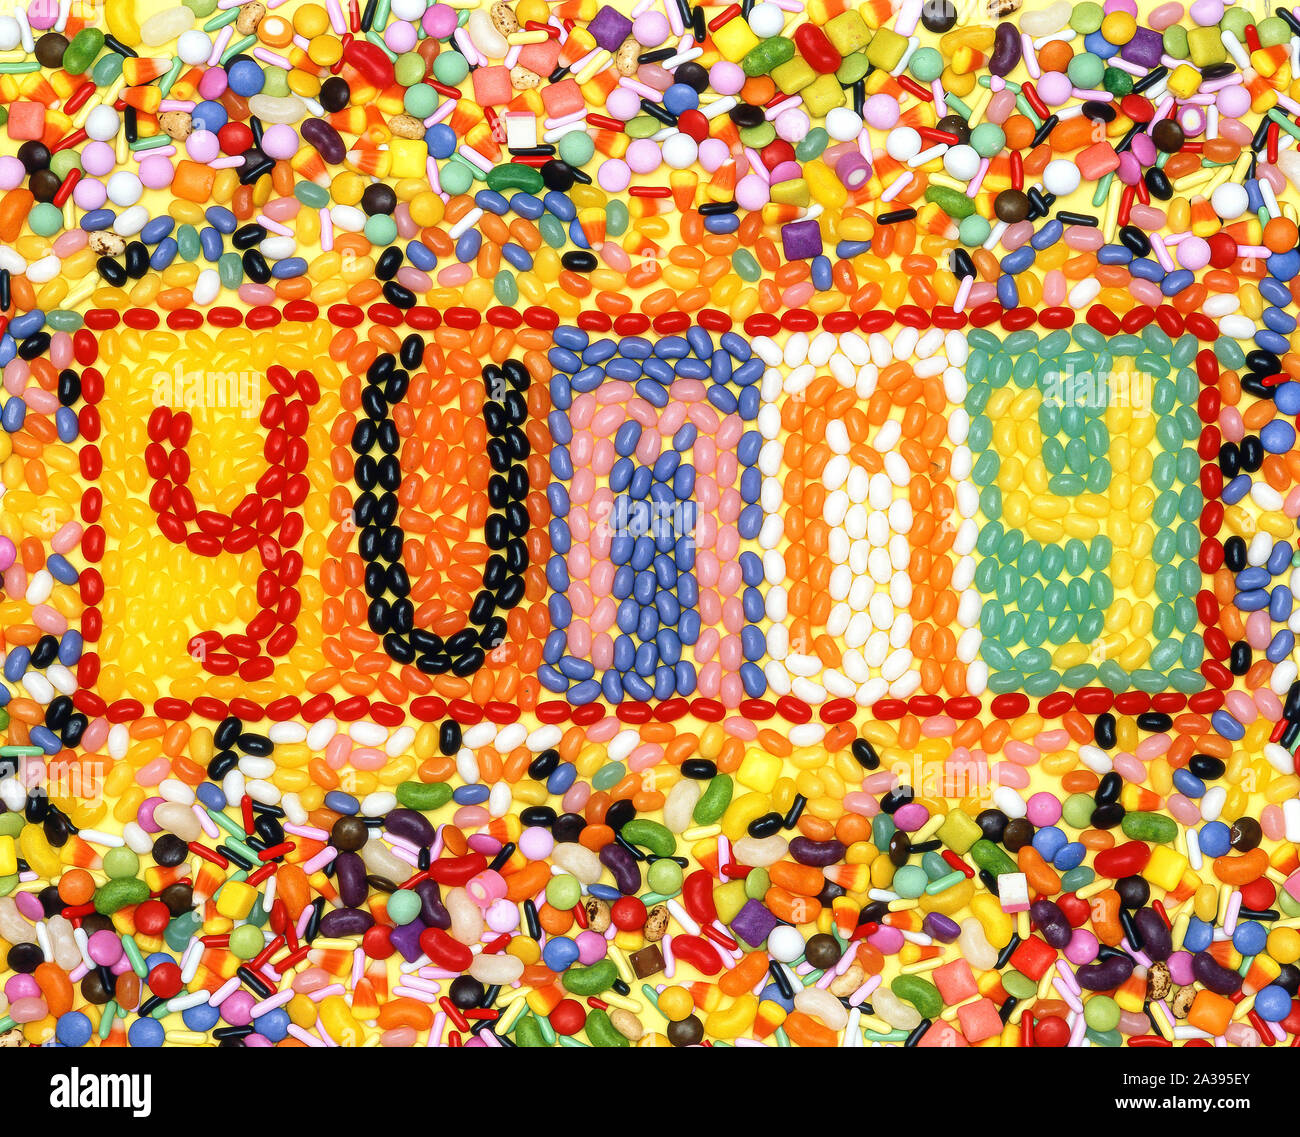 'Yummy' jelly beans and other sweets display, Greater London, England, United Kingdom Stock Photo